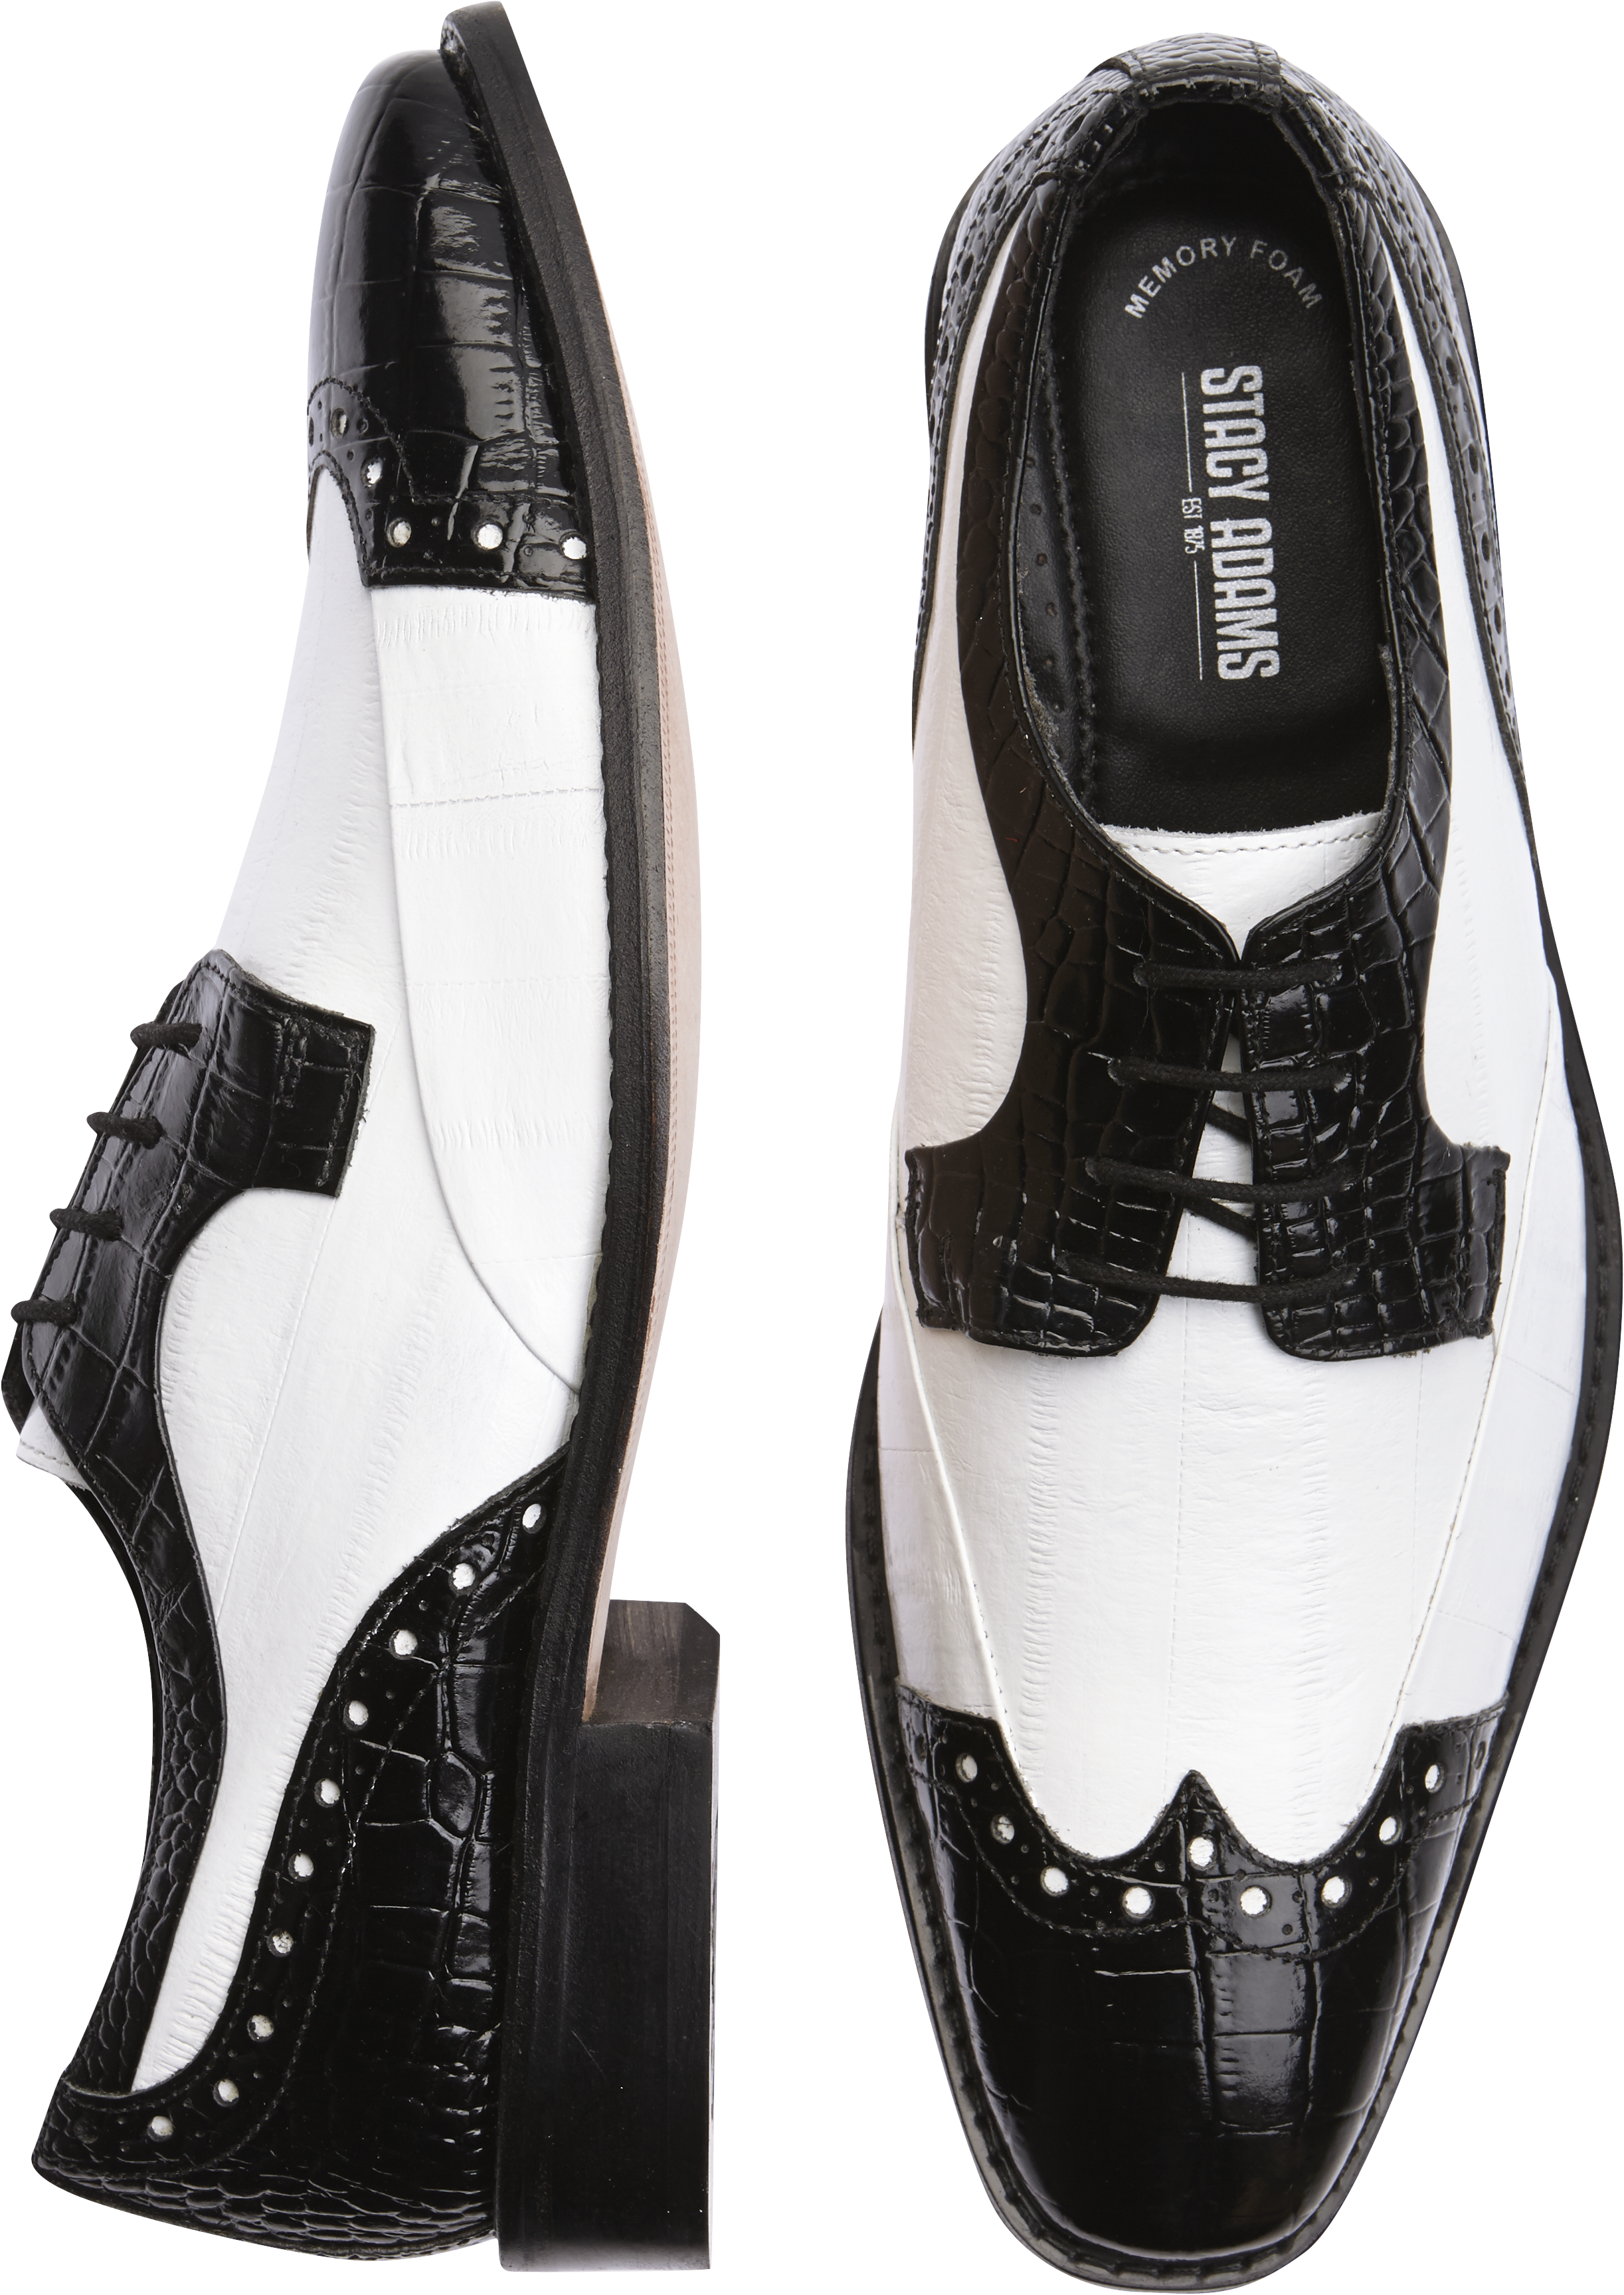 stacy adams black and white wingtip shoes